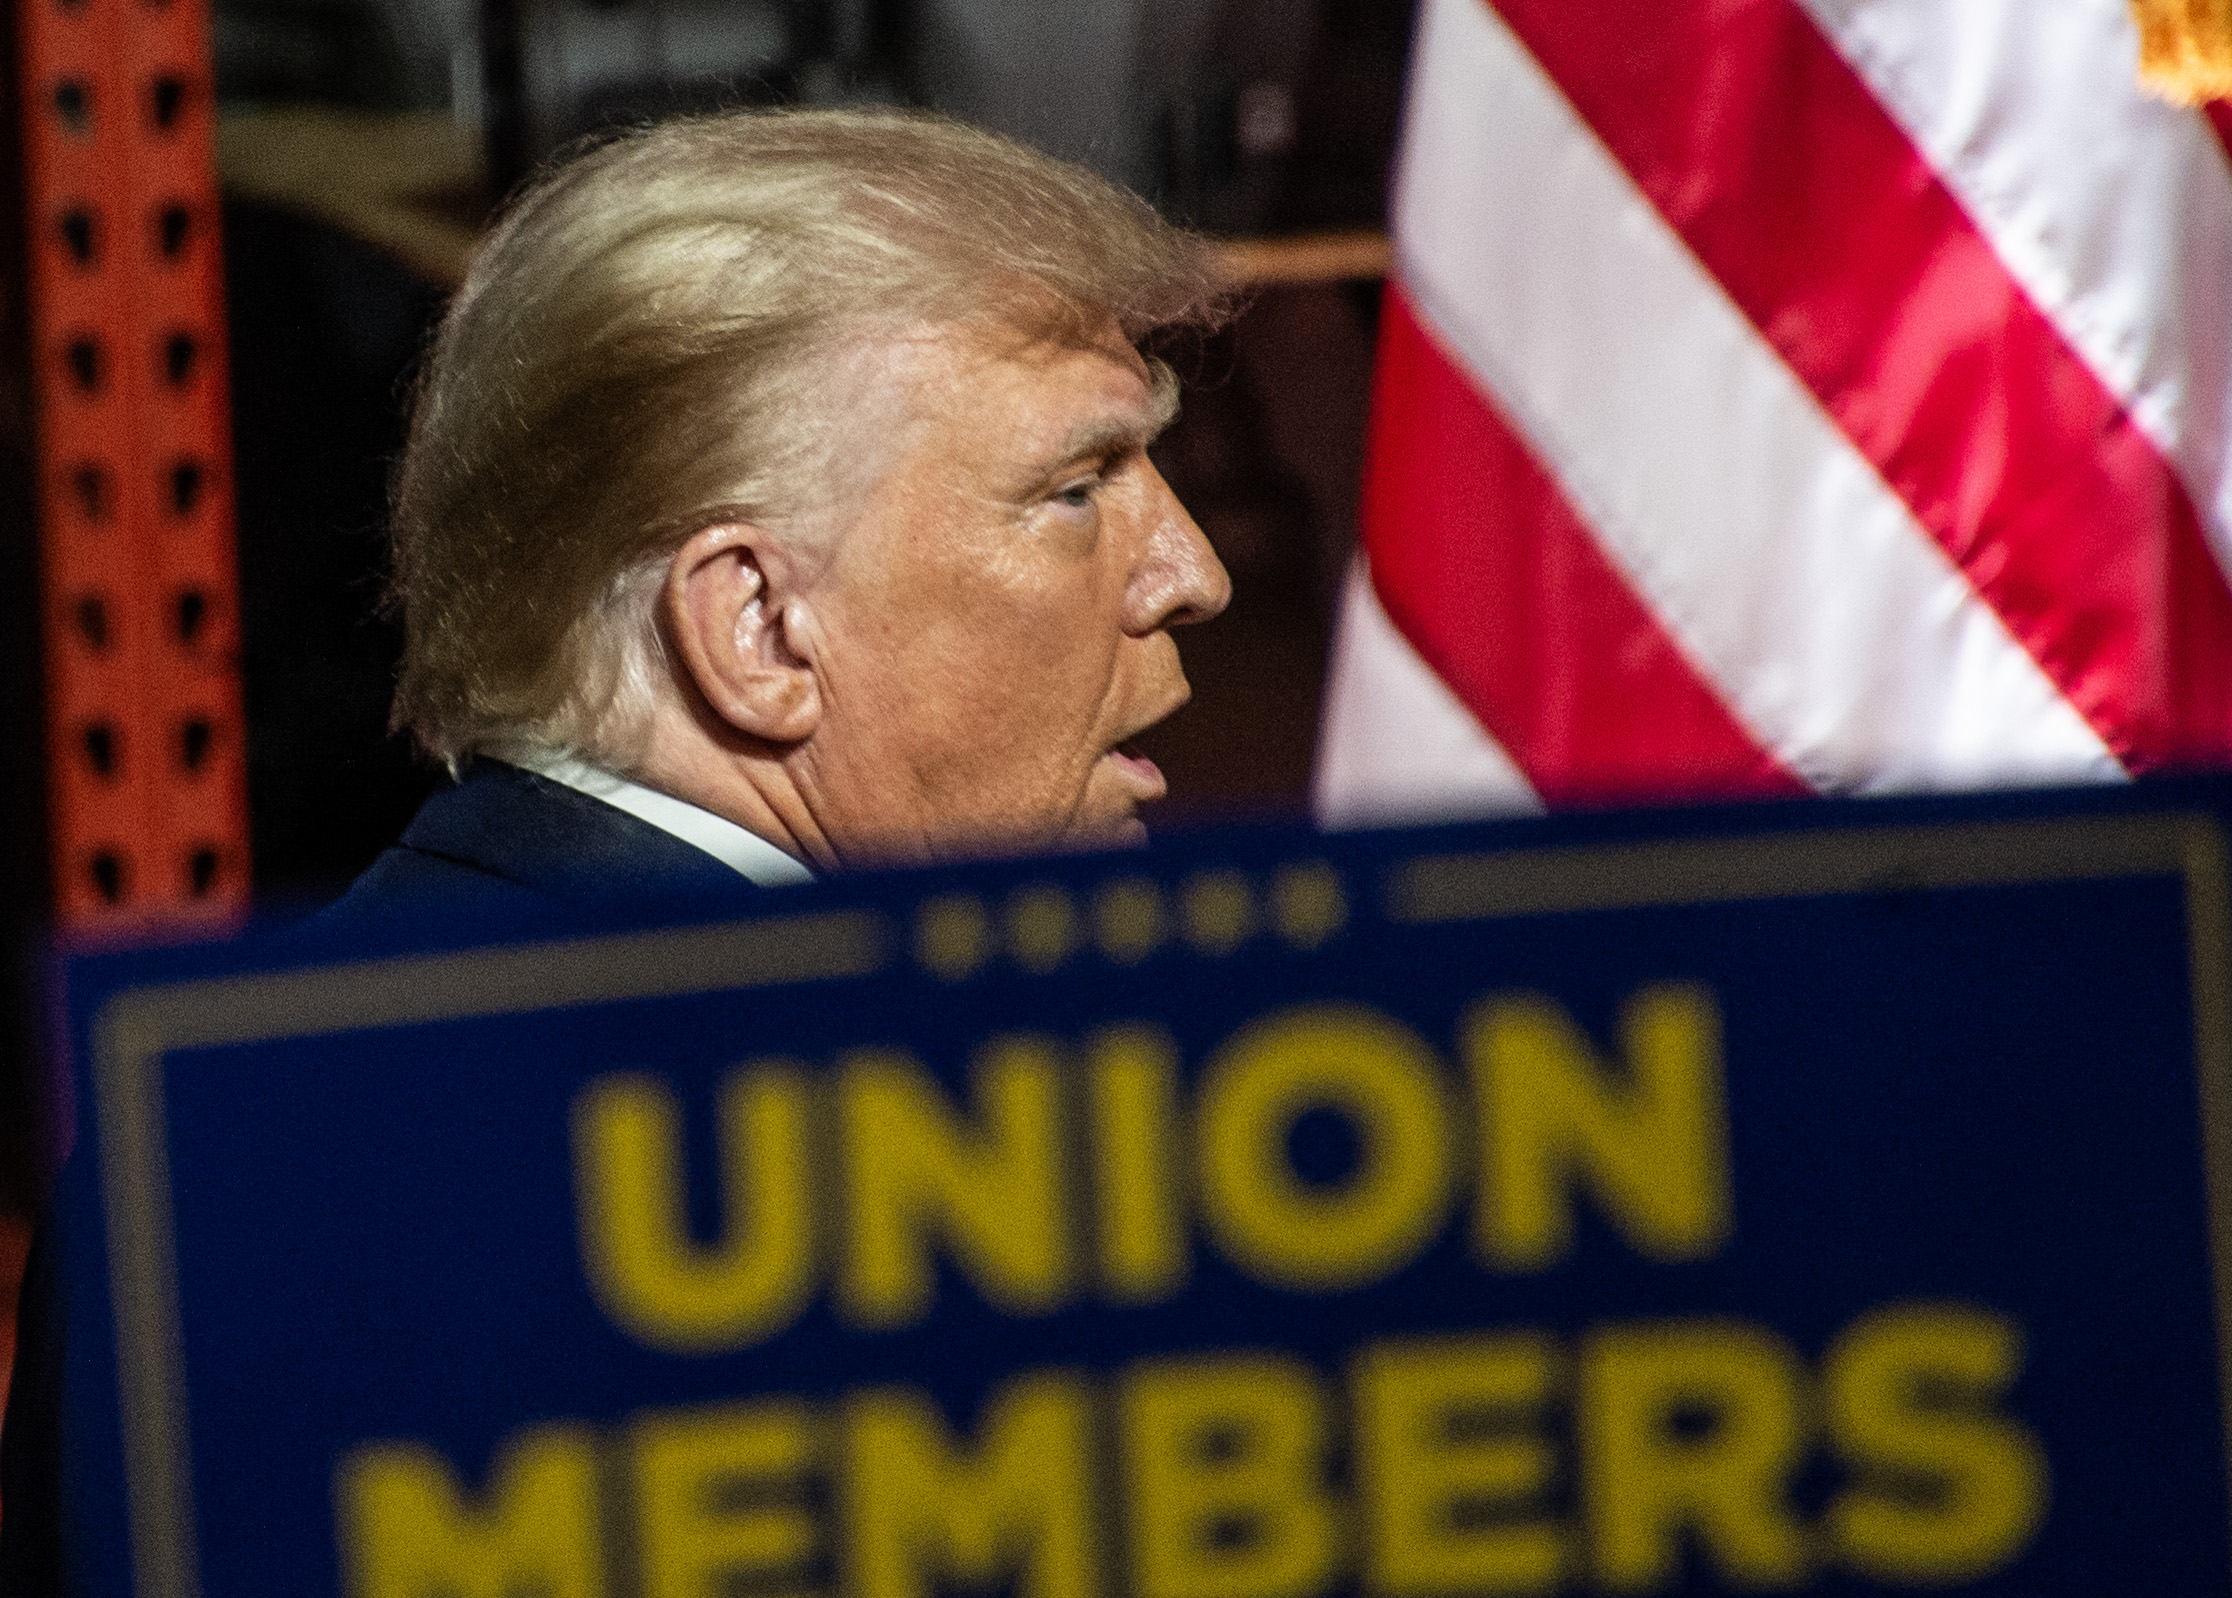 A Blackout on The Phony “Union Members” At Trump’s Event?